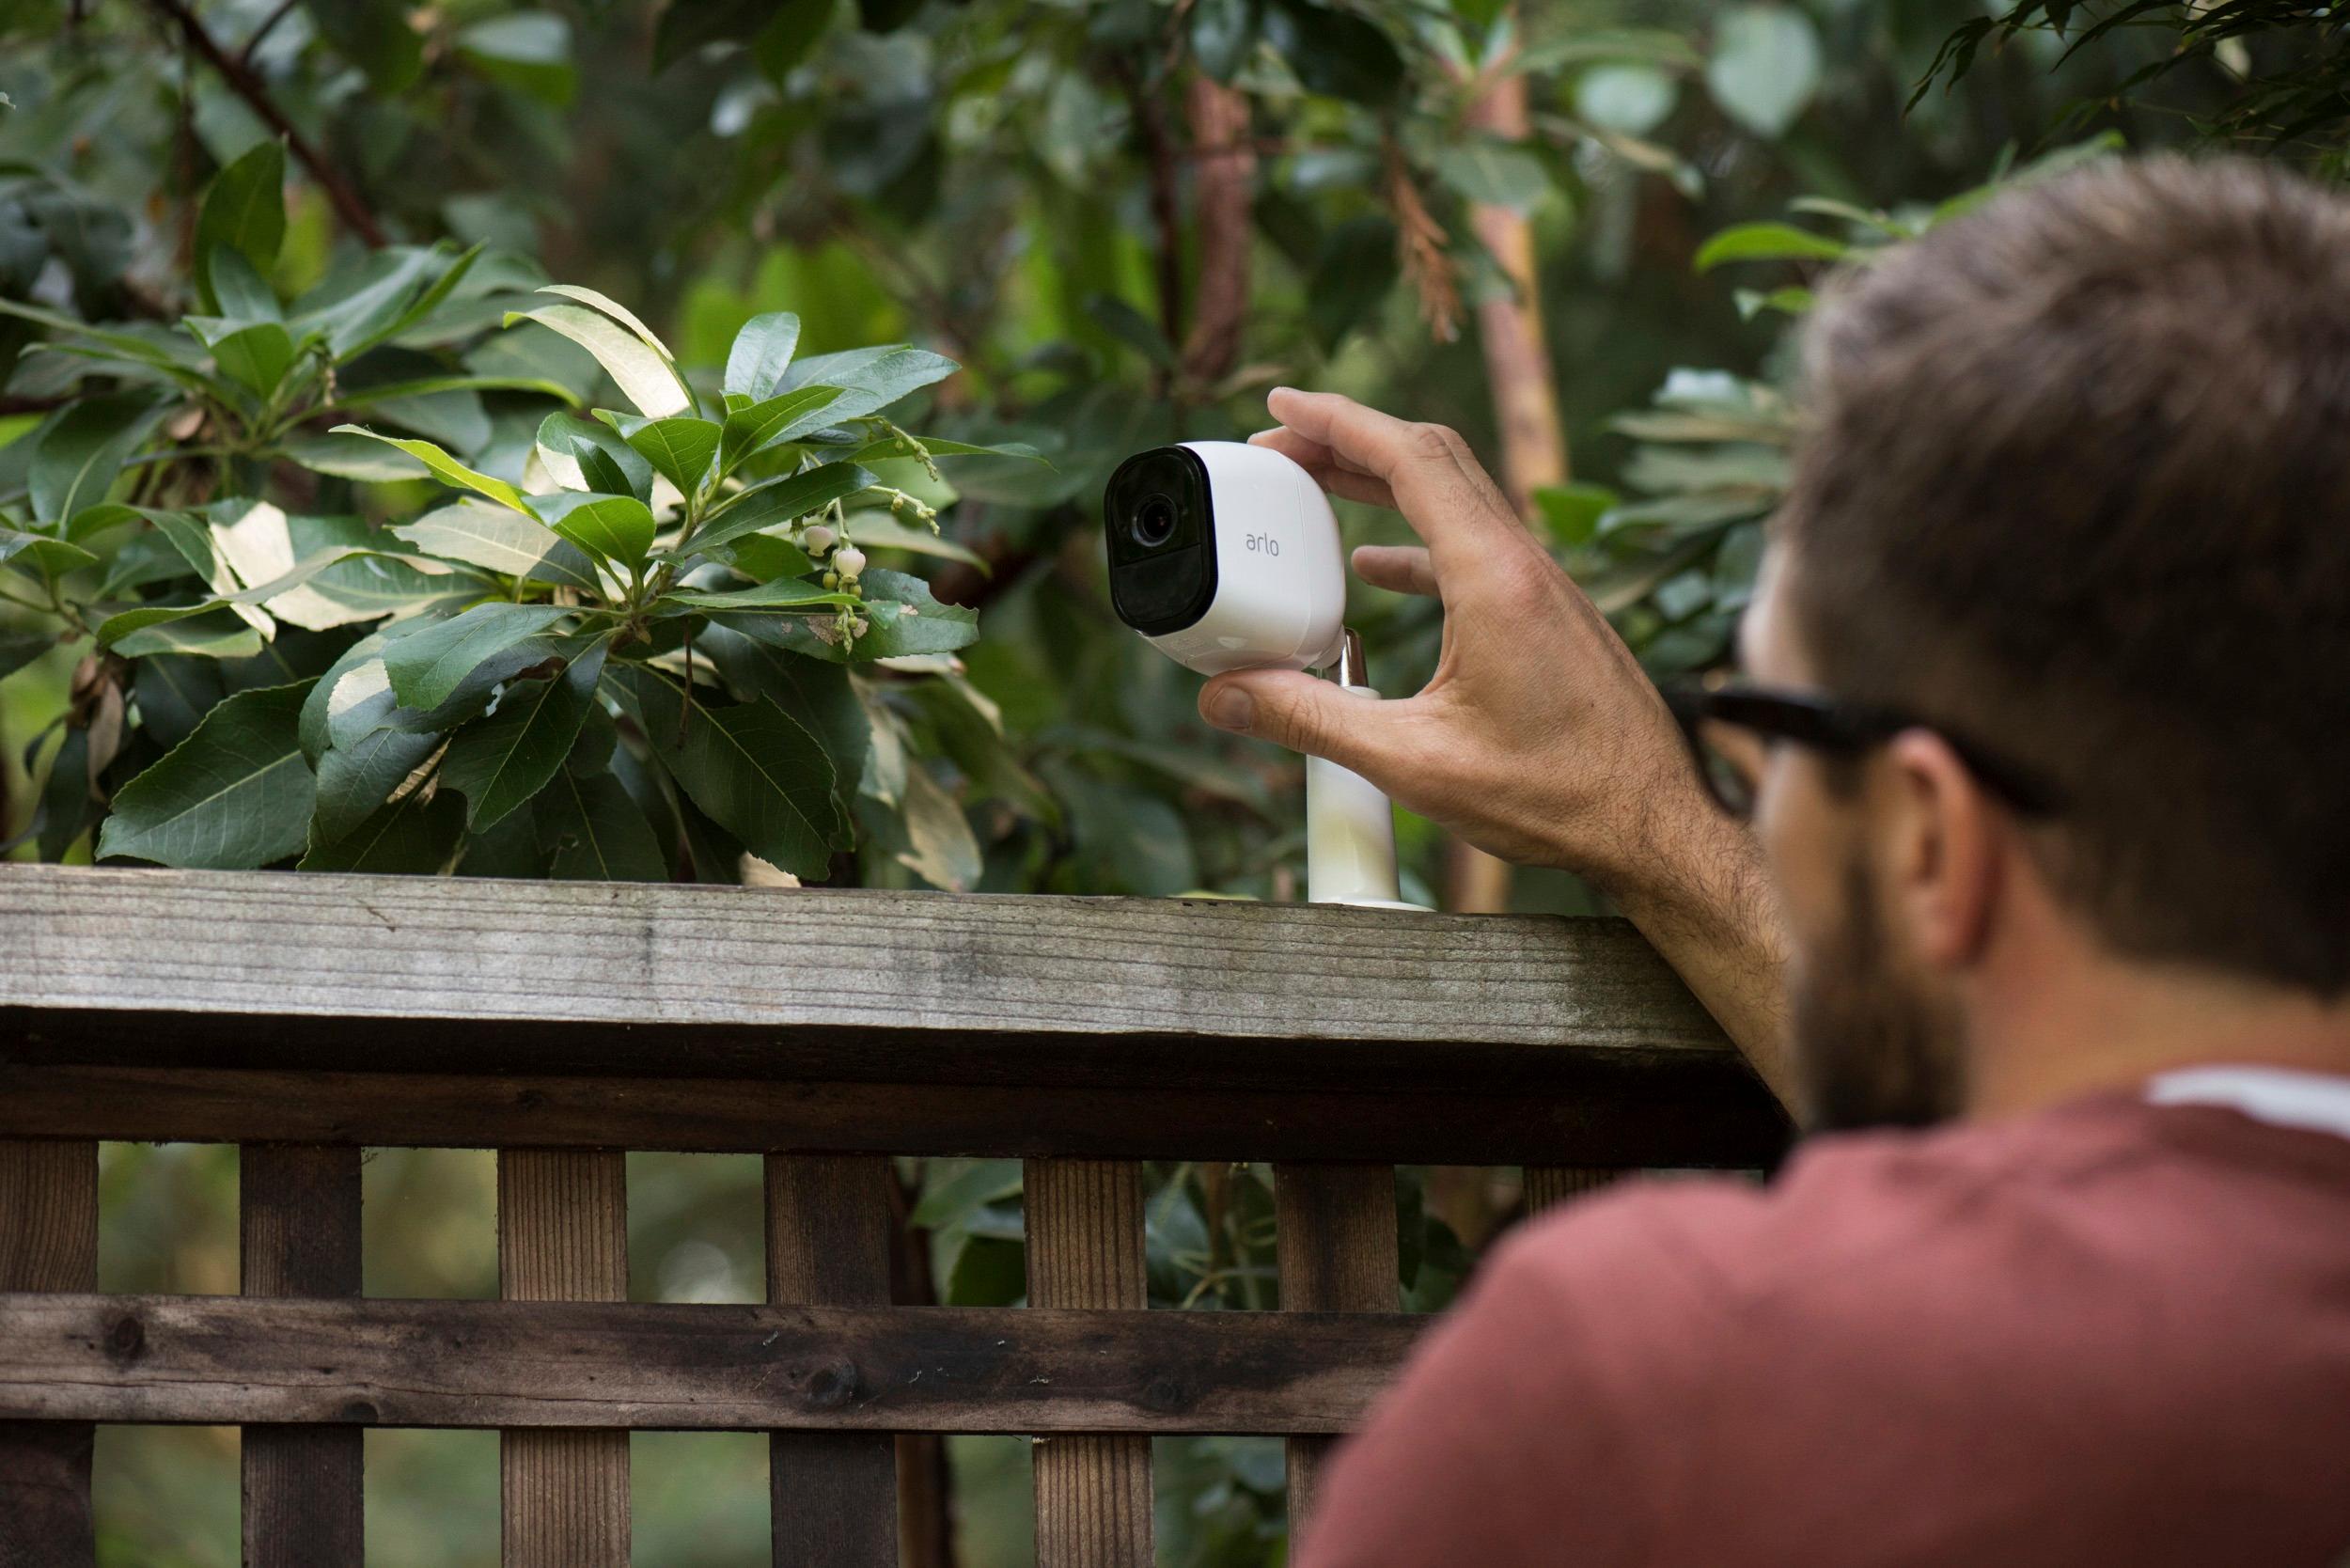 Arlo Pro 5 Review: The Best Outdoor Security Camera